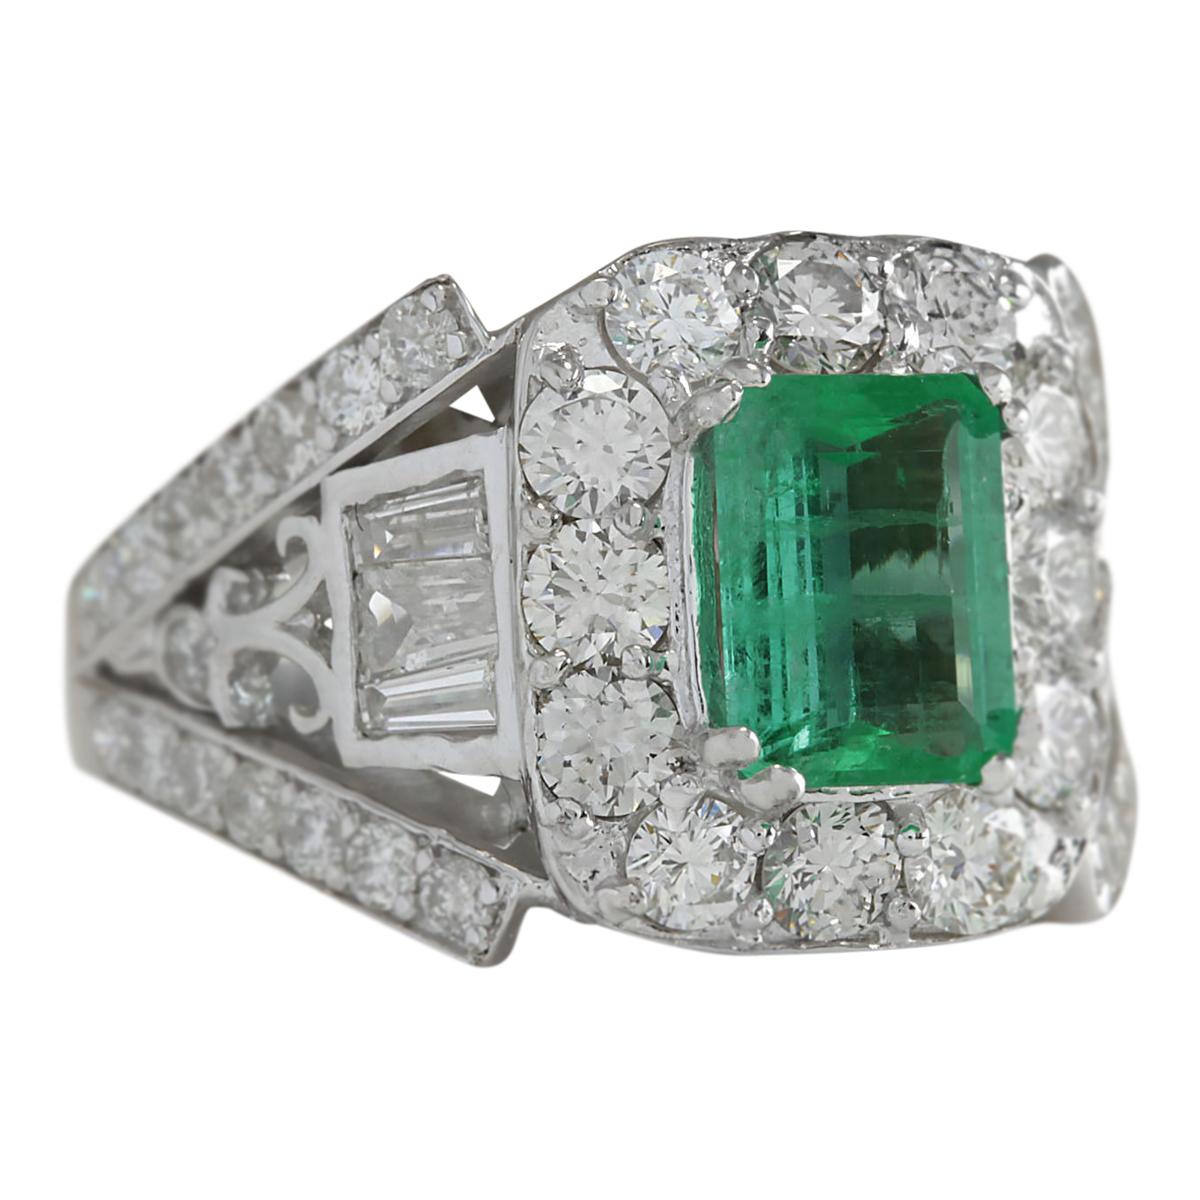 Stamped: 18K White Gold<br />Total Ring Weight: 9.5 Grams<br />Ring Length: N/A<br />Ring Width: N/A<br />Gemstone Weight: Total  Emerald Weight is 2.00 Carat (Measures: 8.45x6.25 mm)<br />Color: Green<br />Diamond Weight: Total  Diamond Weight is